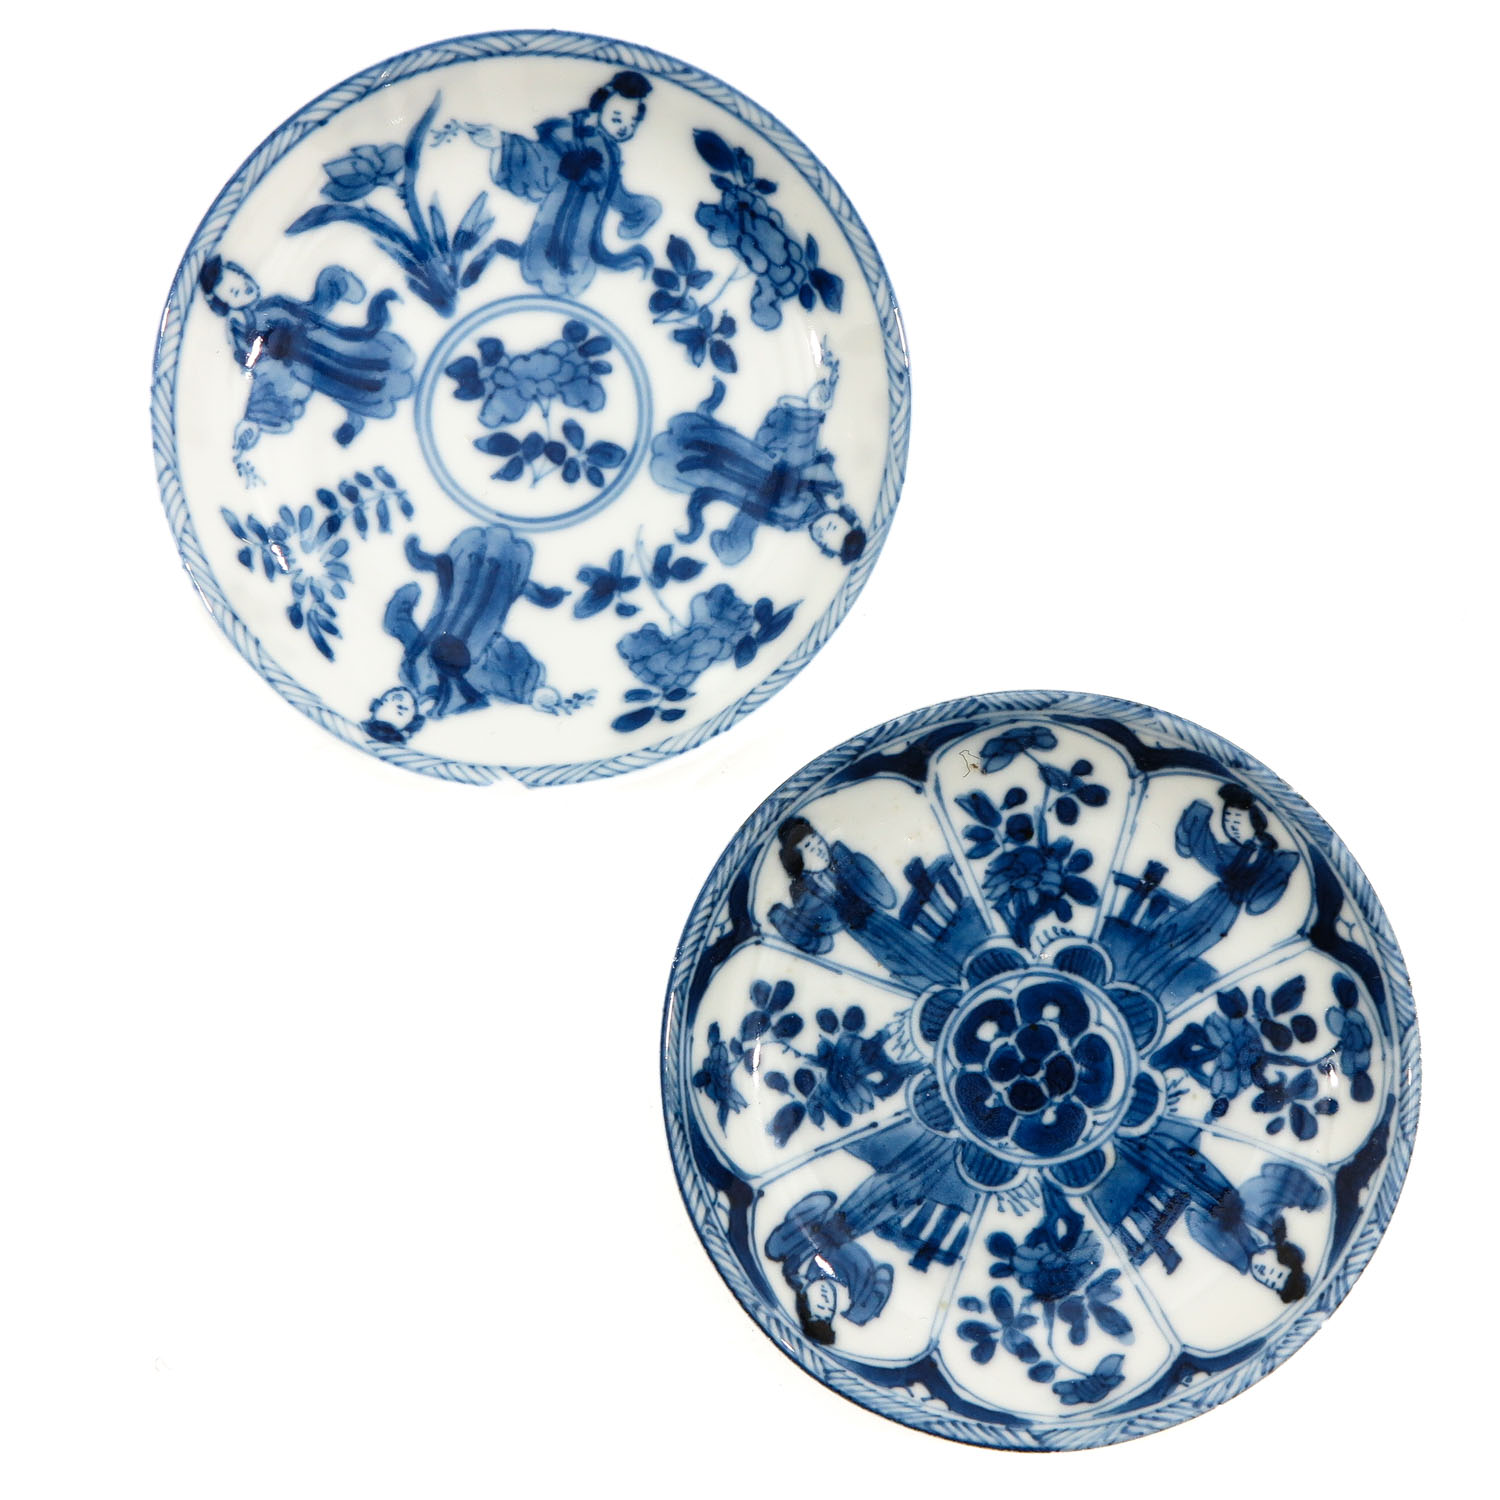 A Collection of 4 Small Blue and White Plates - Image 3 of 10